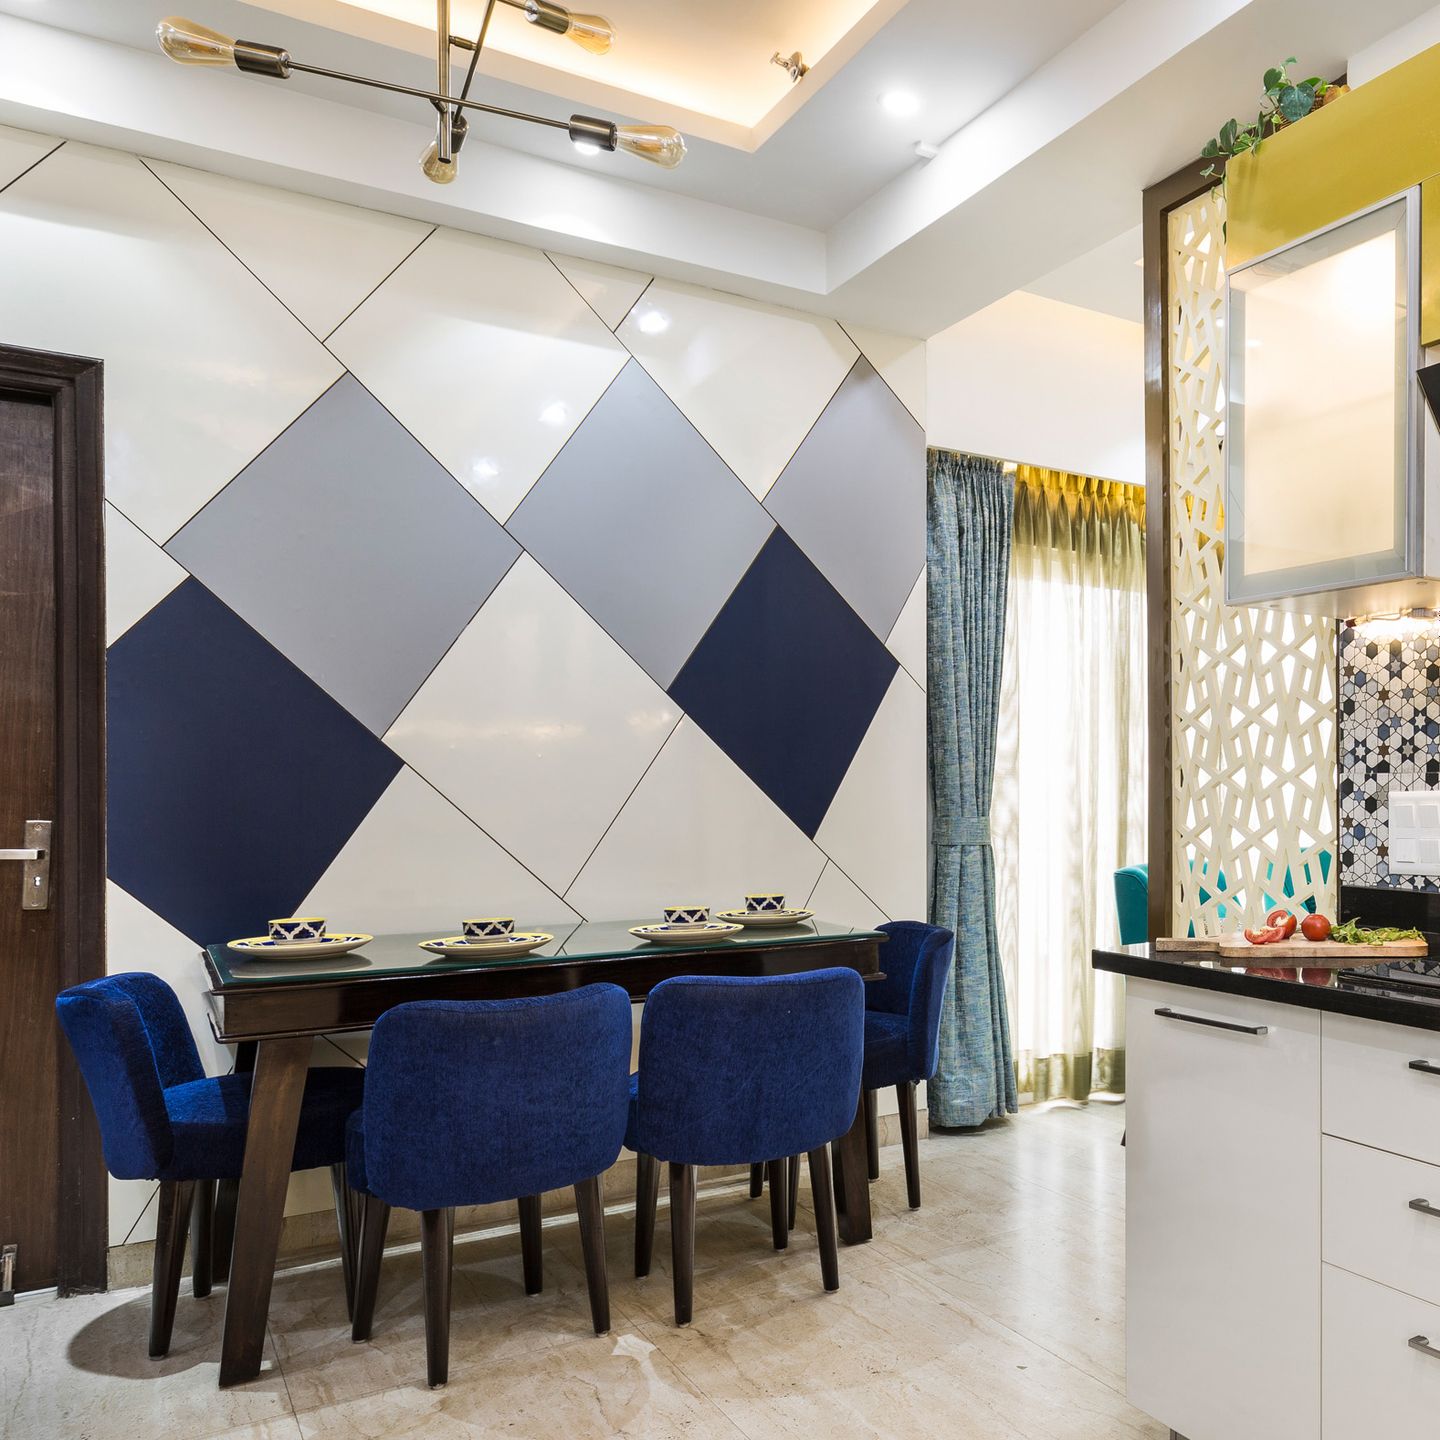 Blue White And Grey Wall Paint Design In Geometric Patterning - Livspace